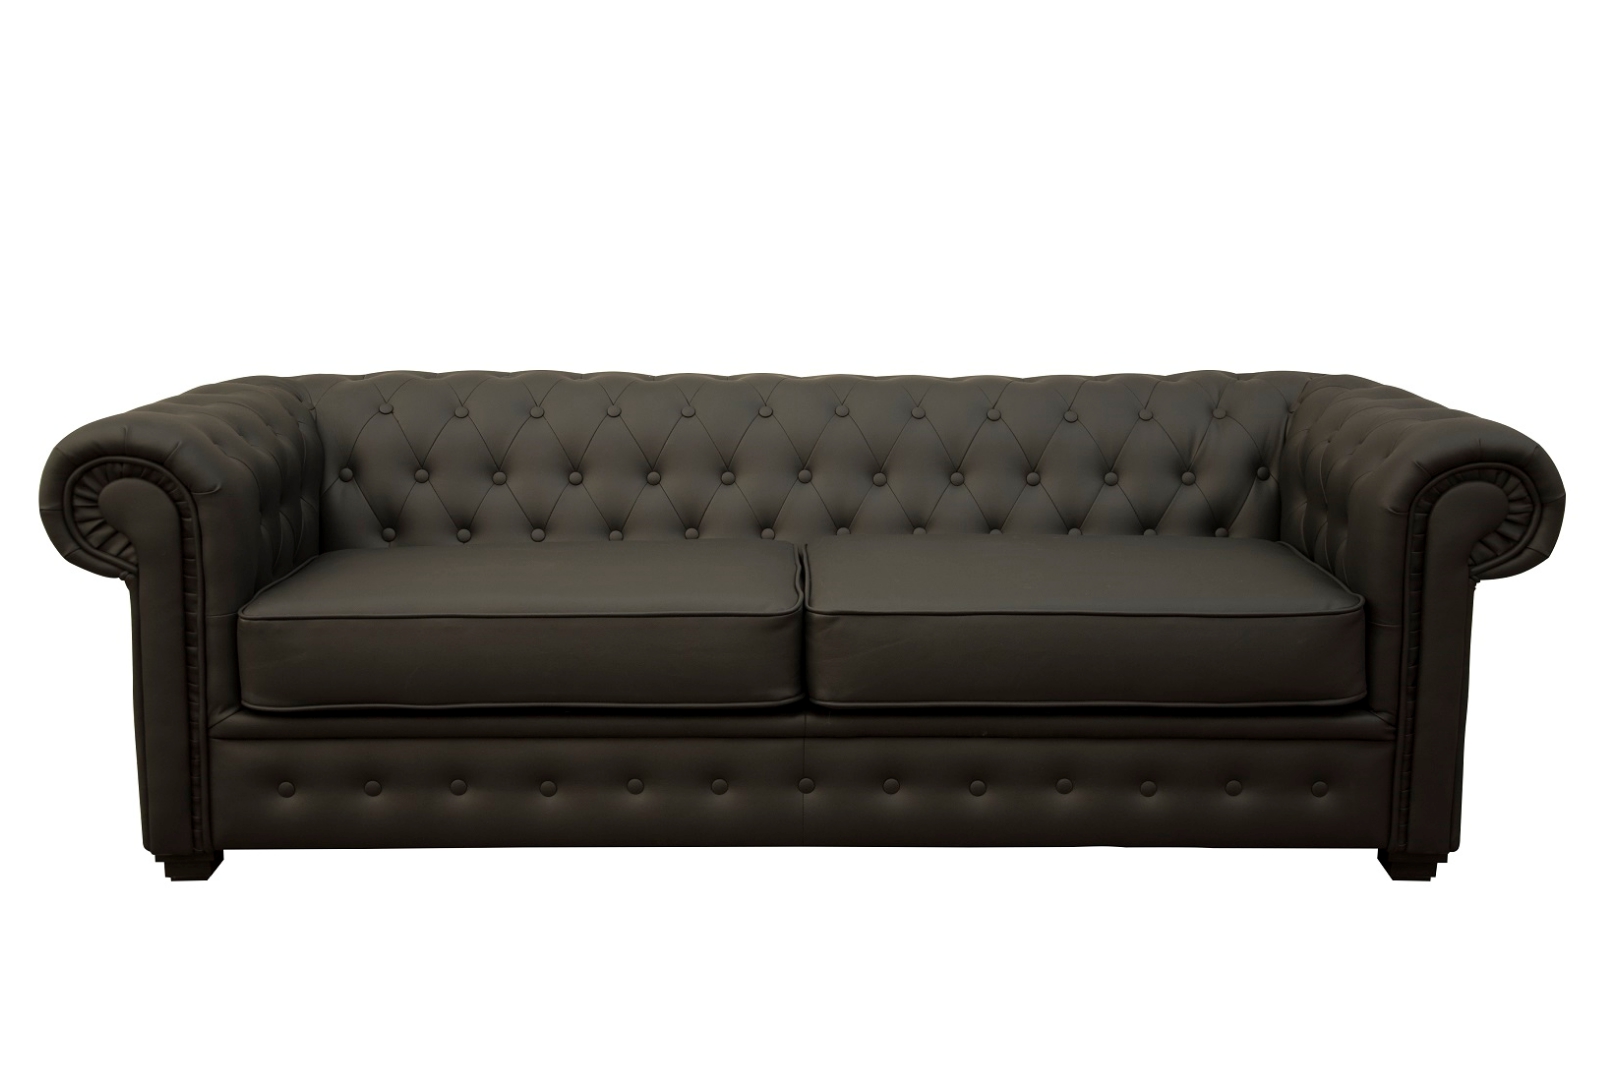 Imperial 2 Seater Faux Leather Sofa Bed, Sofa Bed Faux Leather